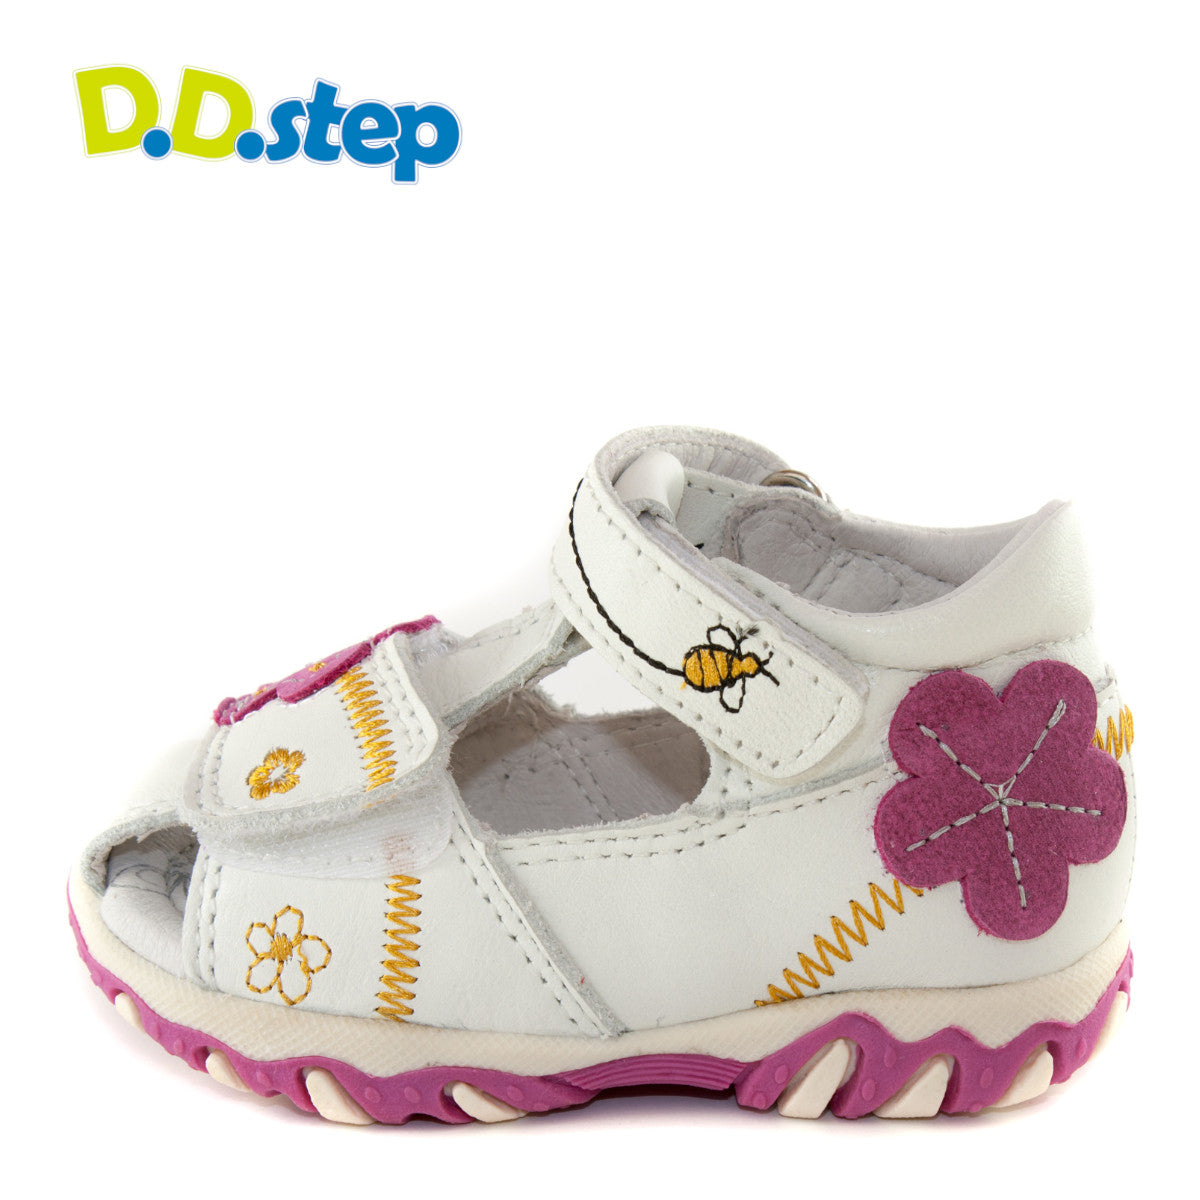 D.D. Step toddler girl sandals white with bees and flower size US 4-8 ...